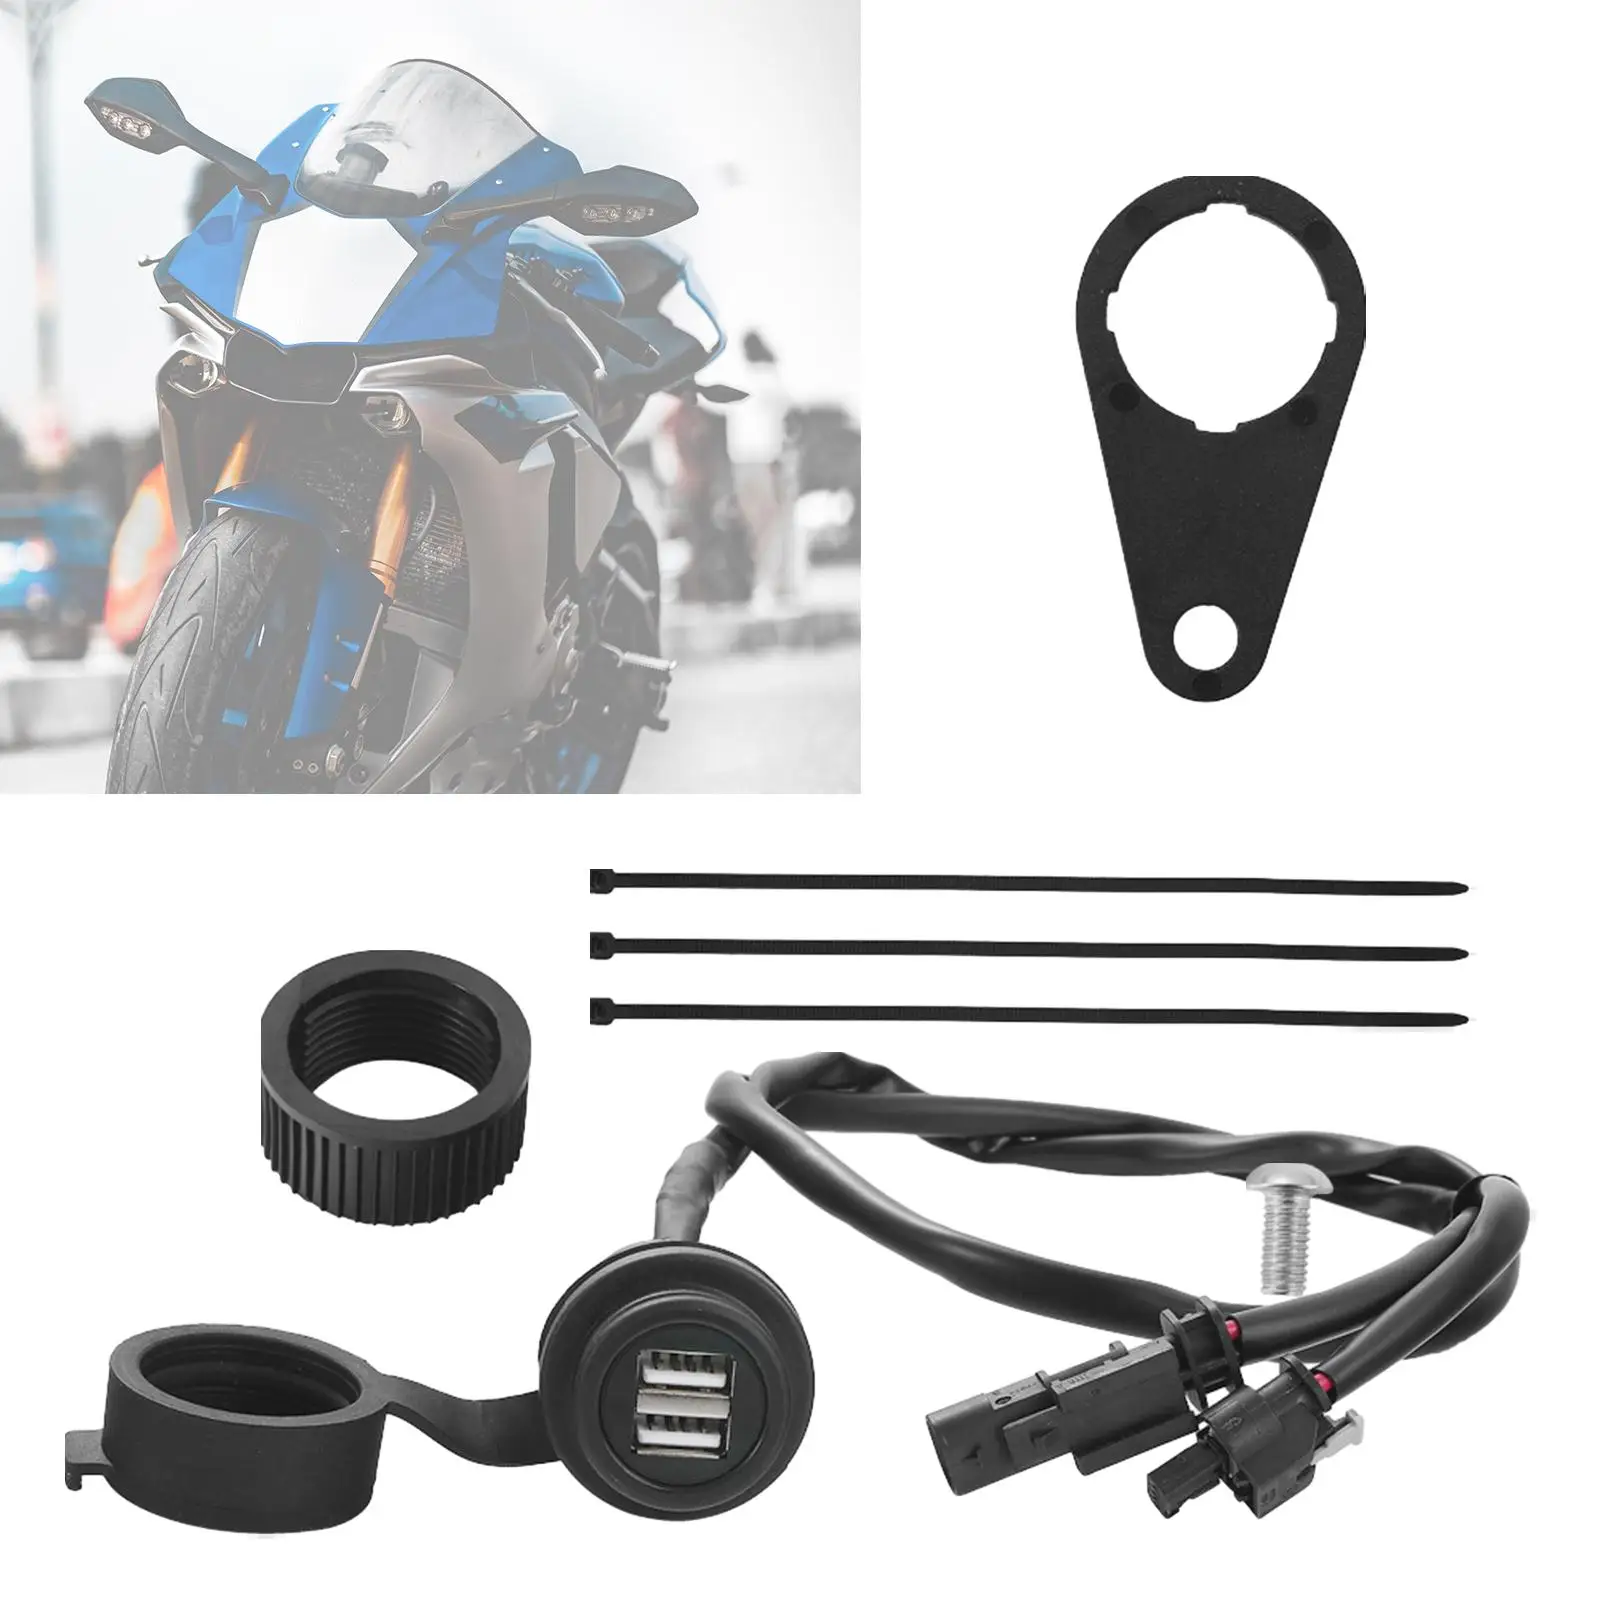 Motorcycle USB Charger Plug Base Plug and Play Dustproof Easy to Mount USB Adapter for BMW R1250GS R1200GS F700GS Supplies